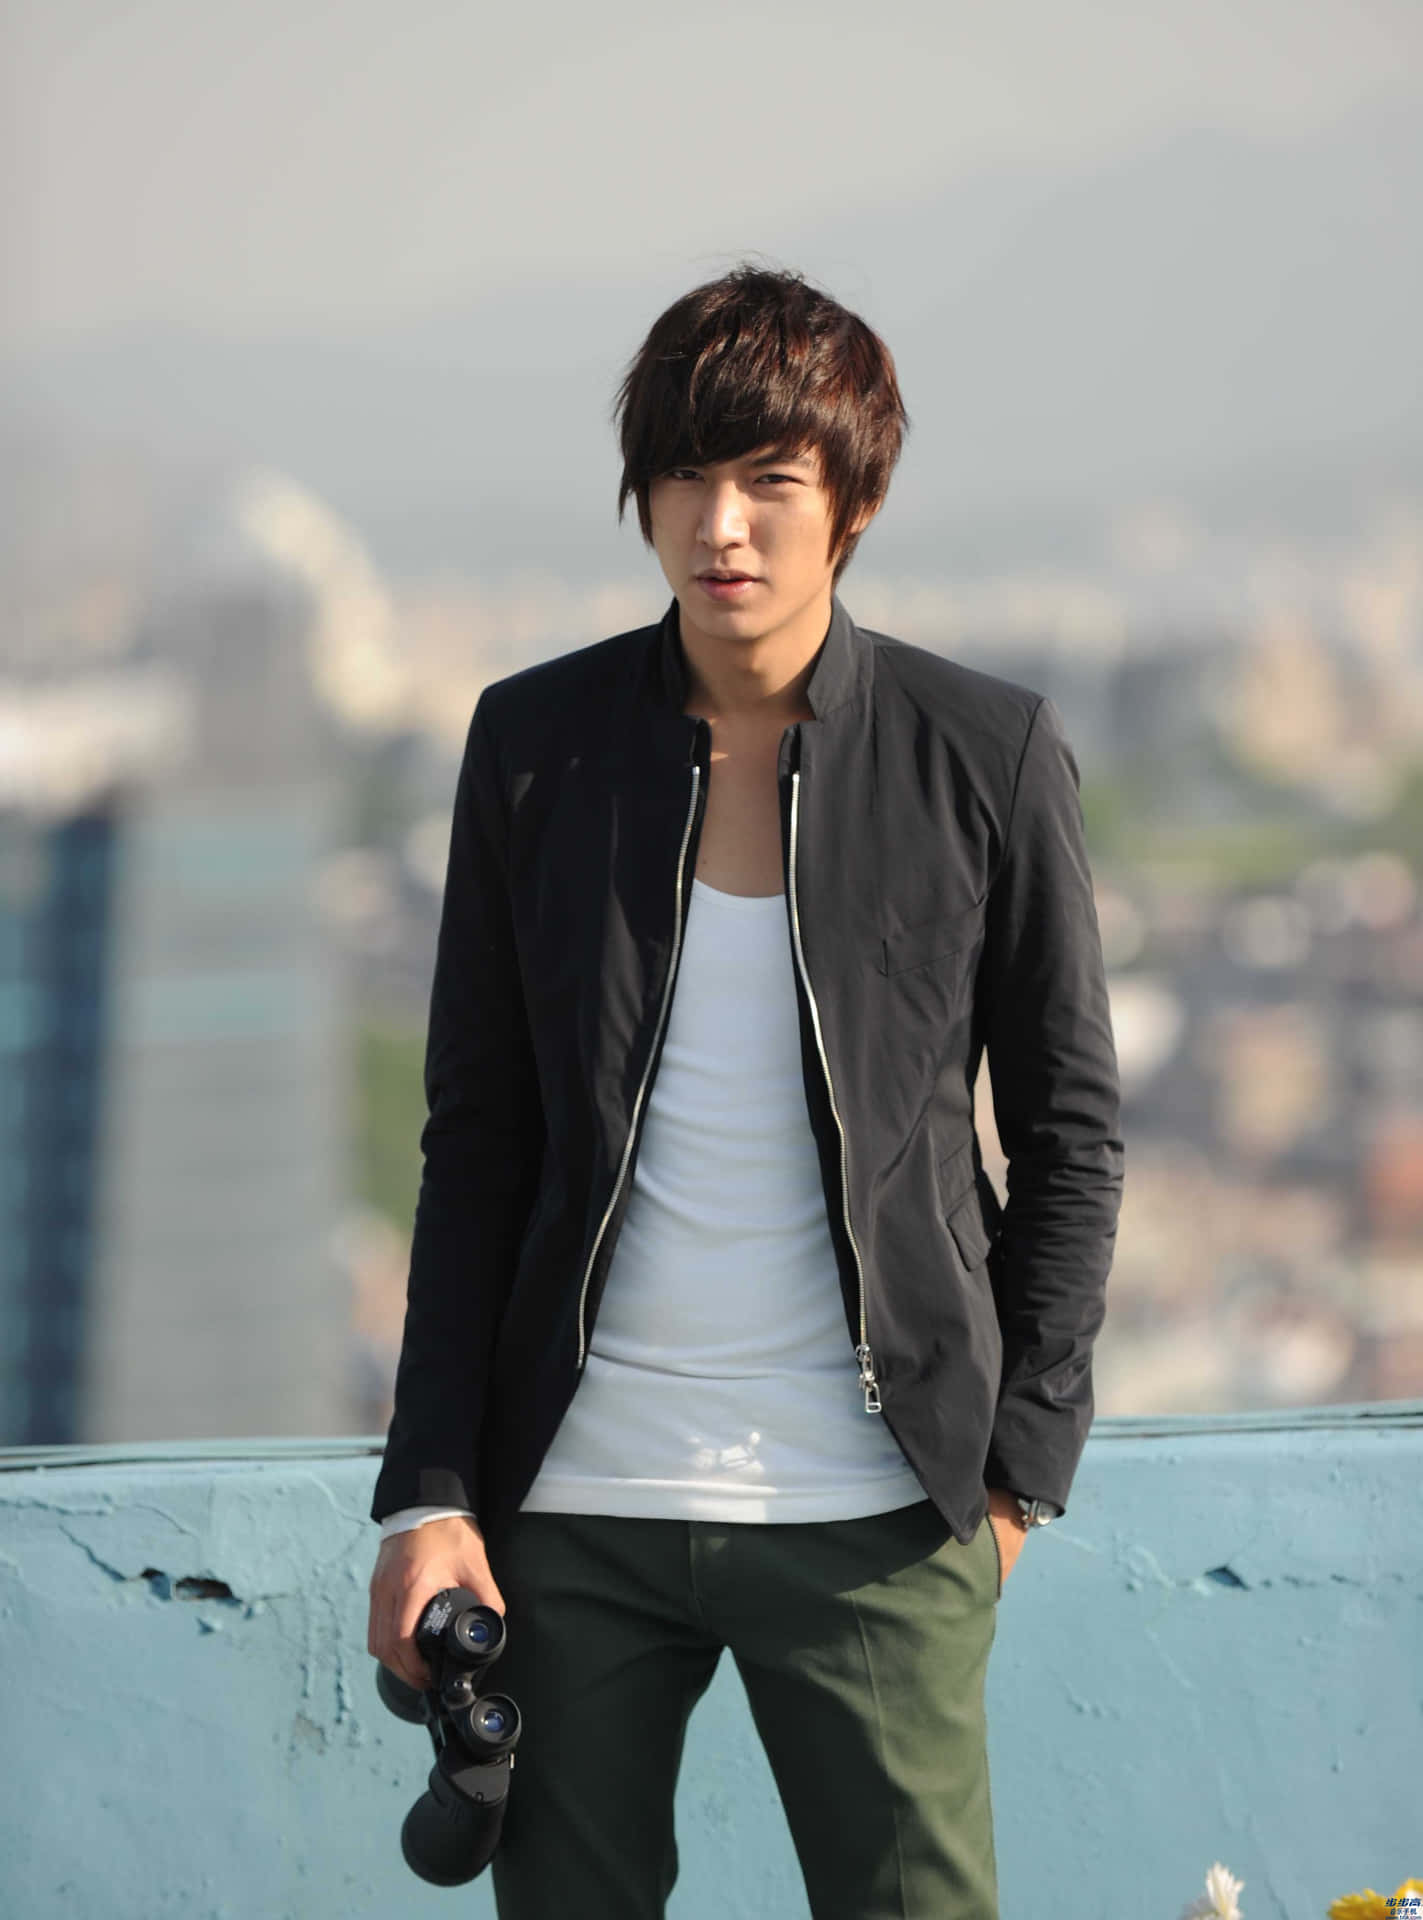 No-nonsense Snapshot Of Lee Min Ho, South Korean Top Model And Actor Background